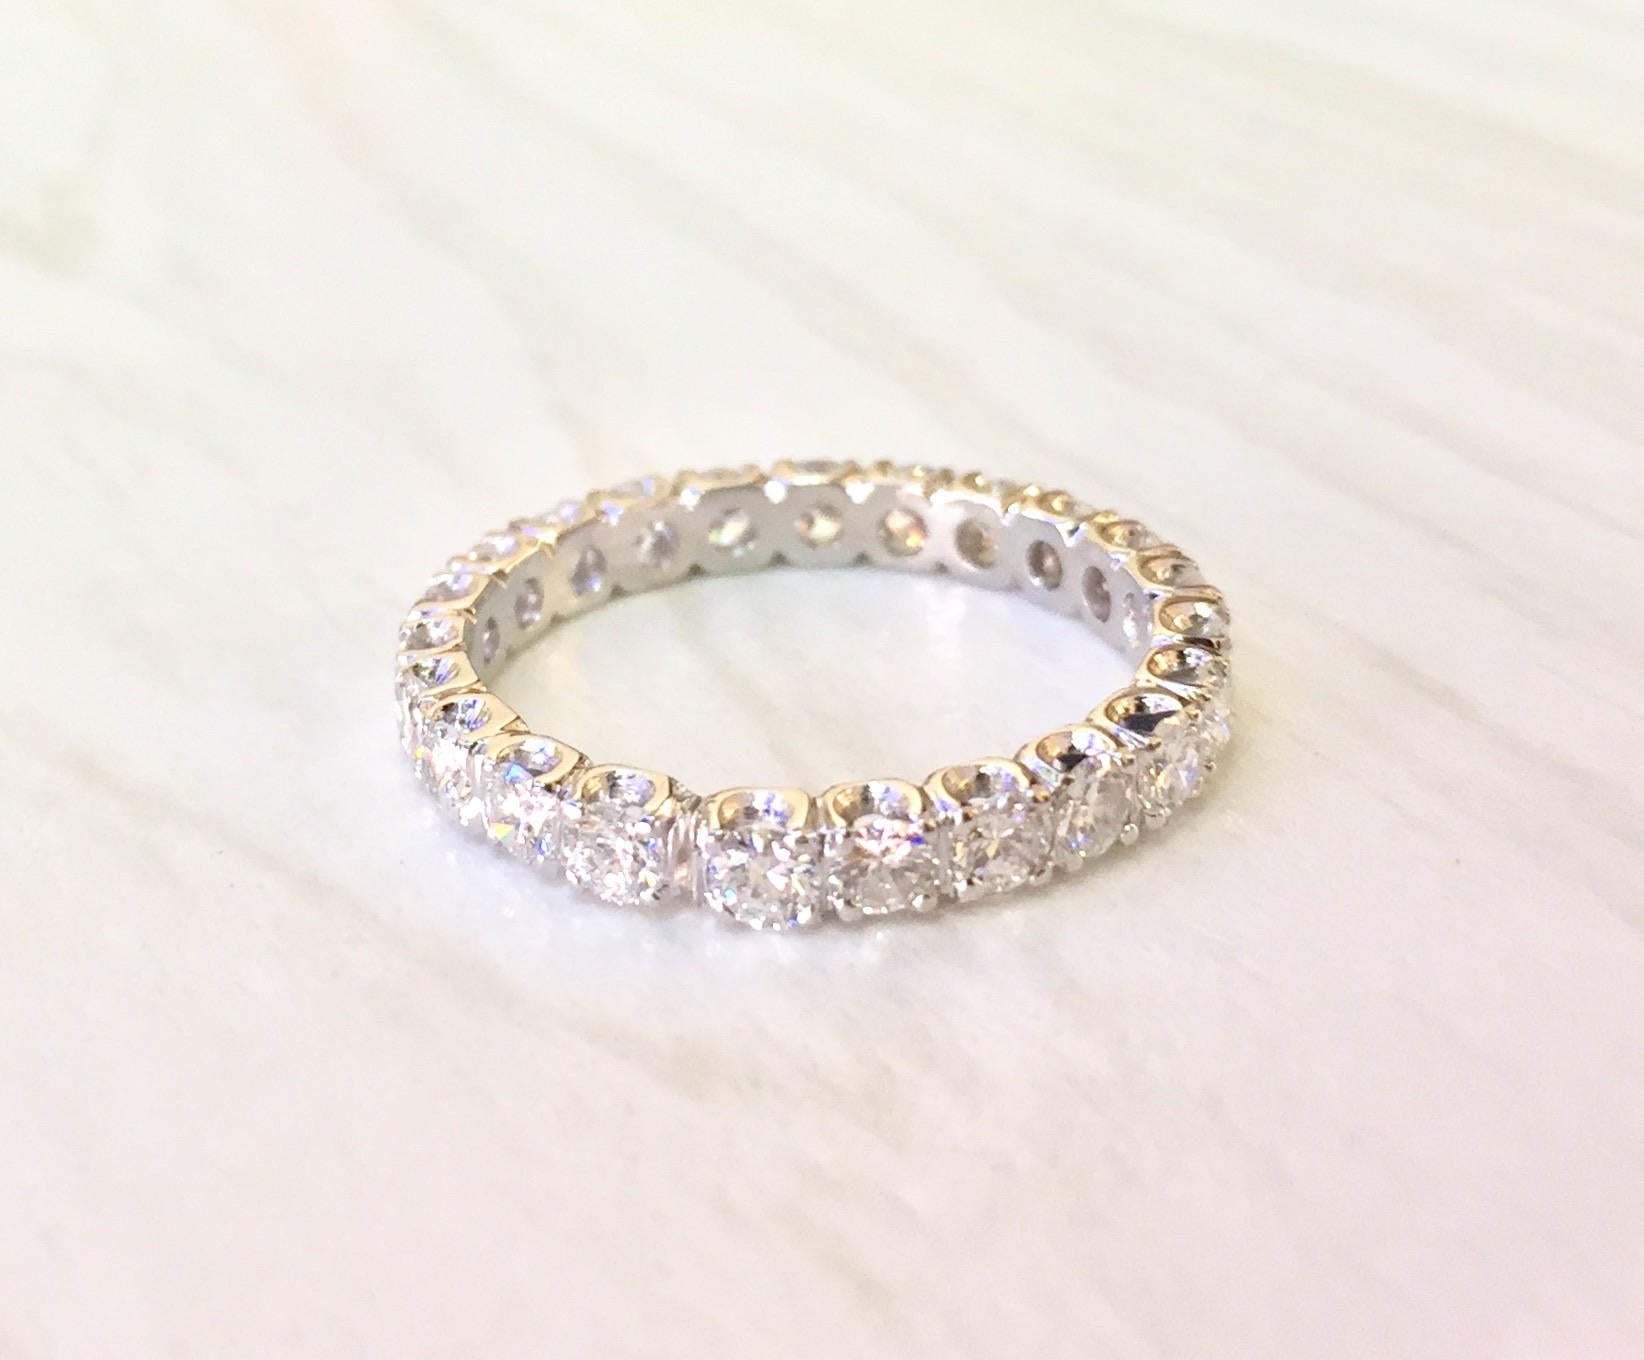 14 karat white gold eternity wedding band ring with round brilliant cut diamonds set all the way around the band. The diamonds are prong set with a scalloped edge design on the ring. The ring has a bright polish finish and sits on a light colored fabric background.